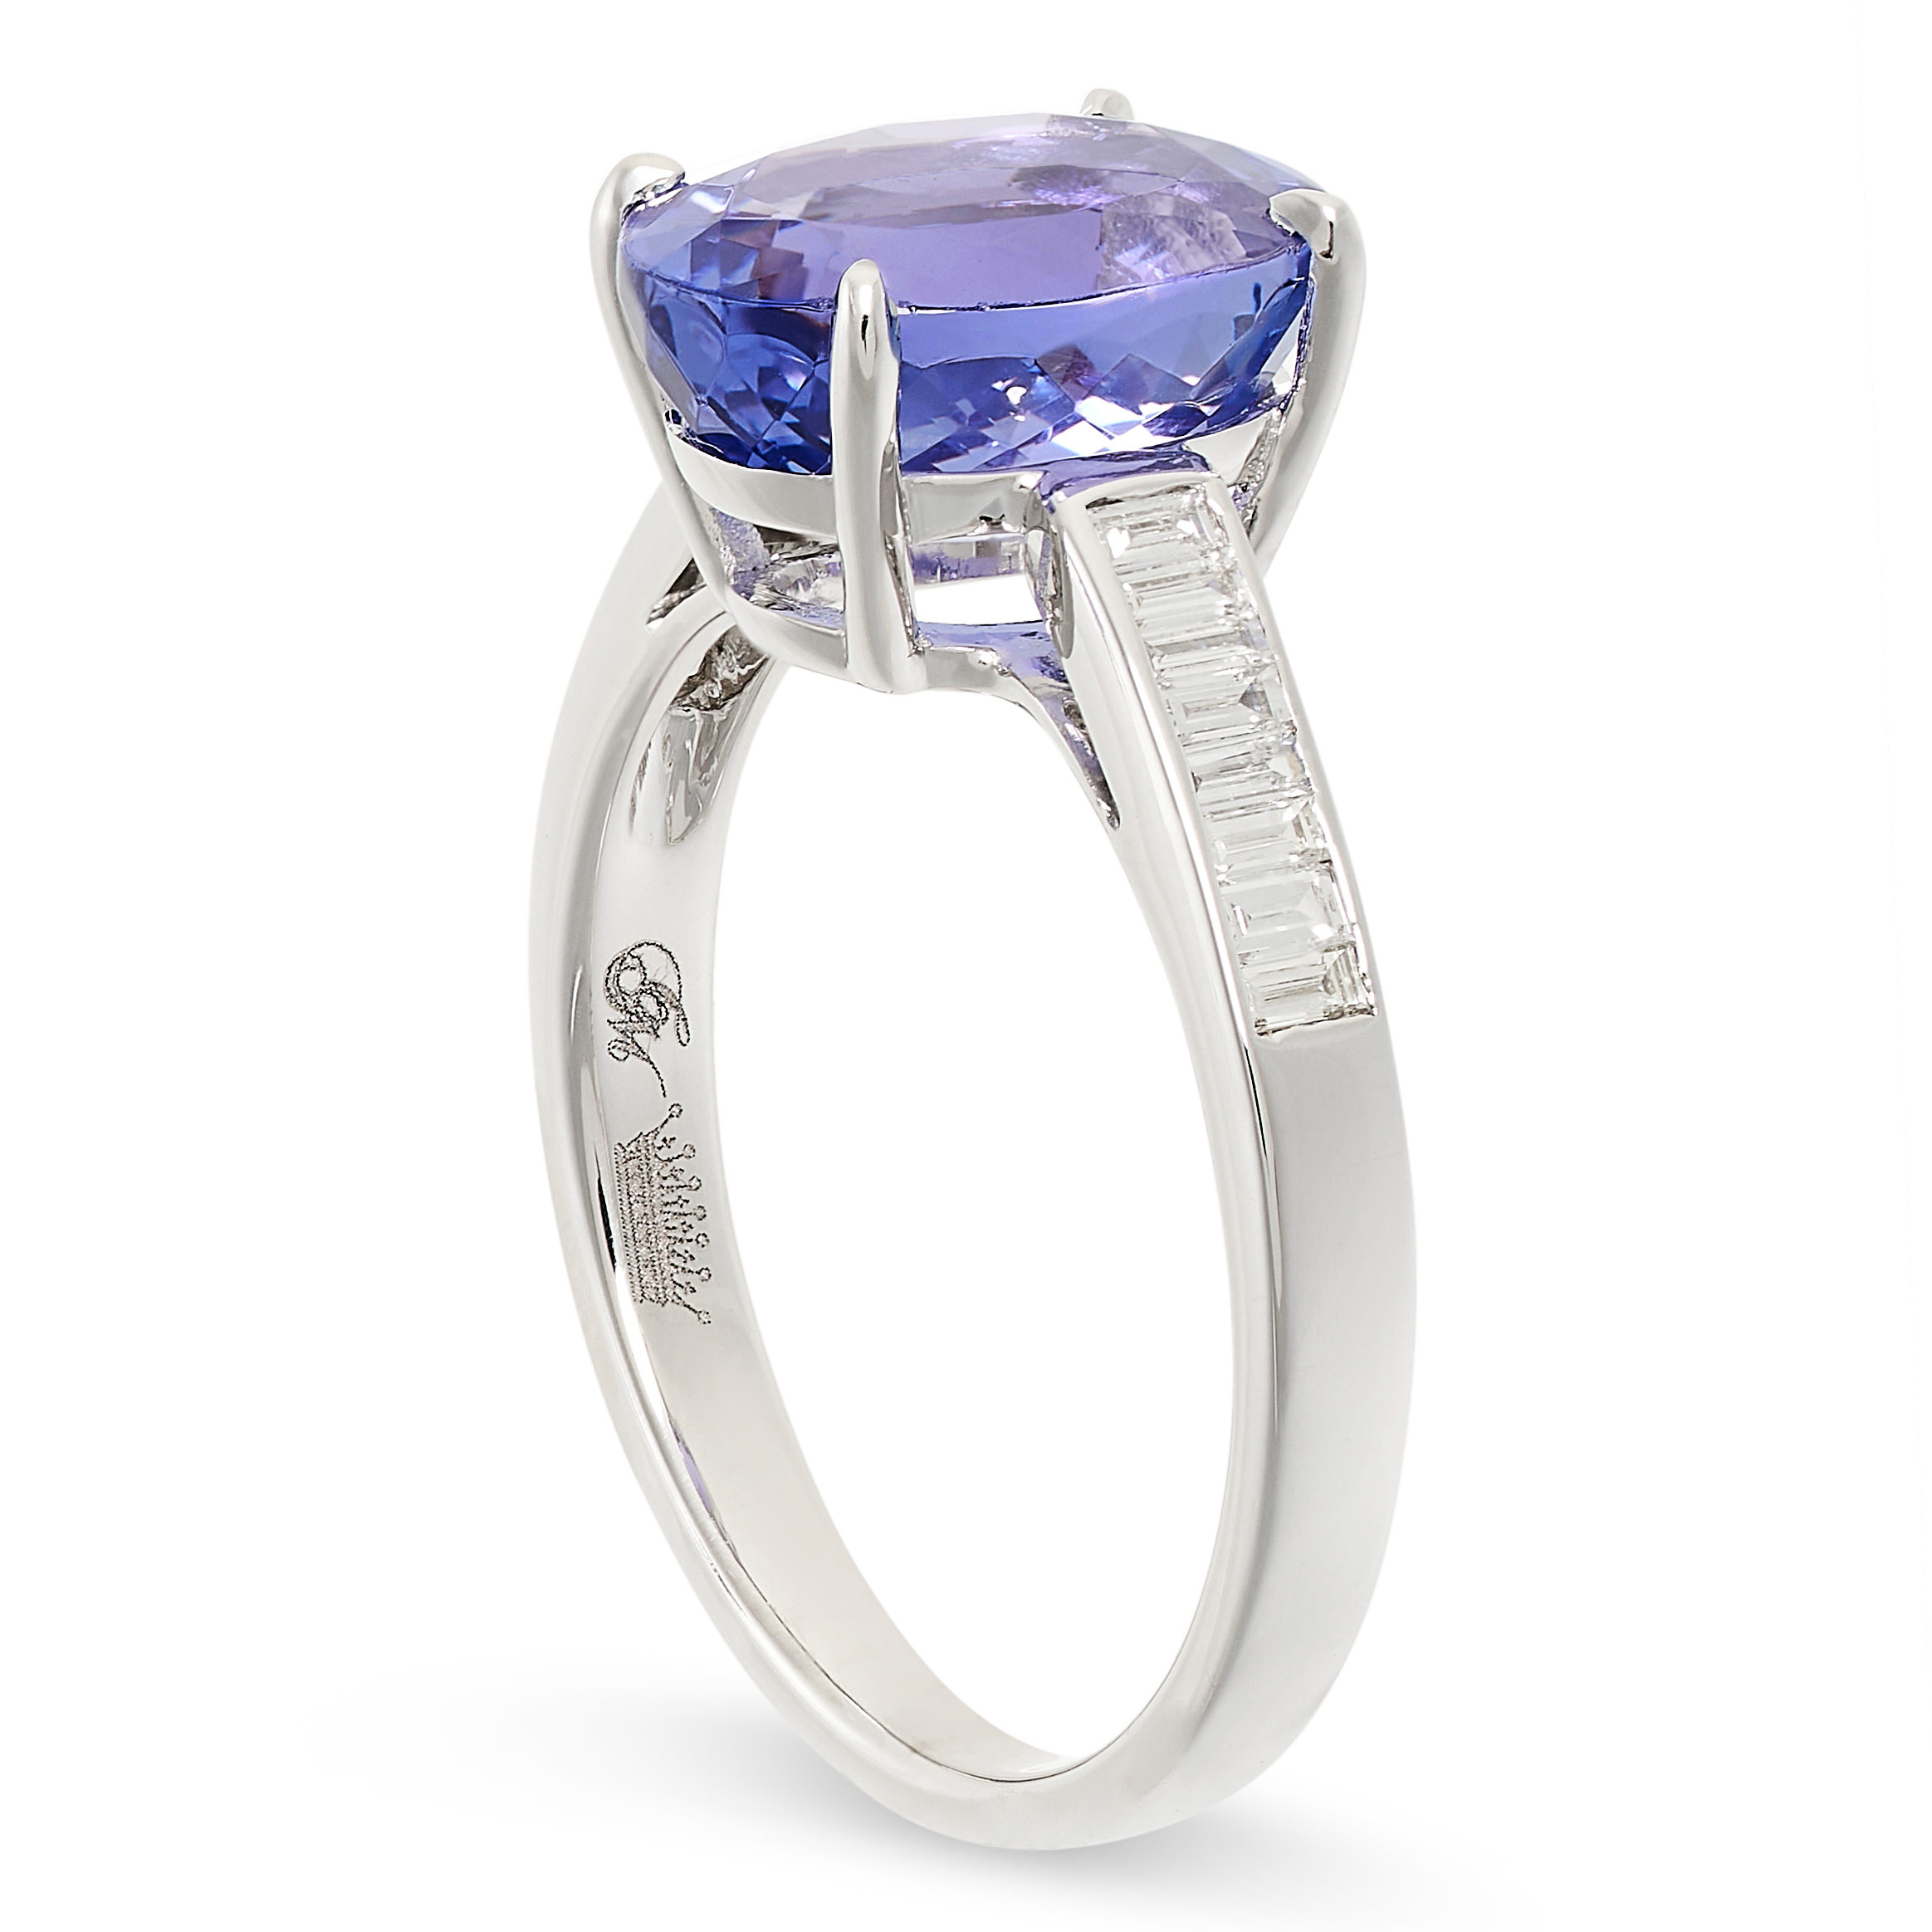 A TANZANITE AND DIAMOND RING in 18ct white gold, set with an oval cut tanzanite of 4.33 carats - Image 2 of 2